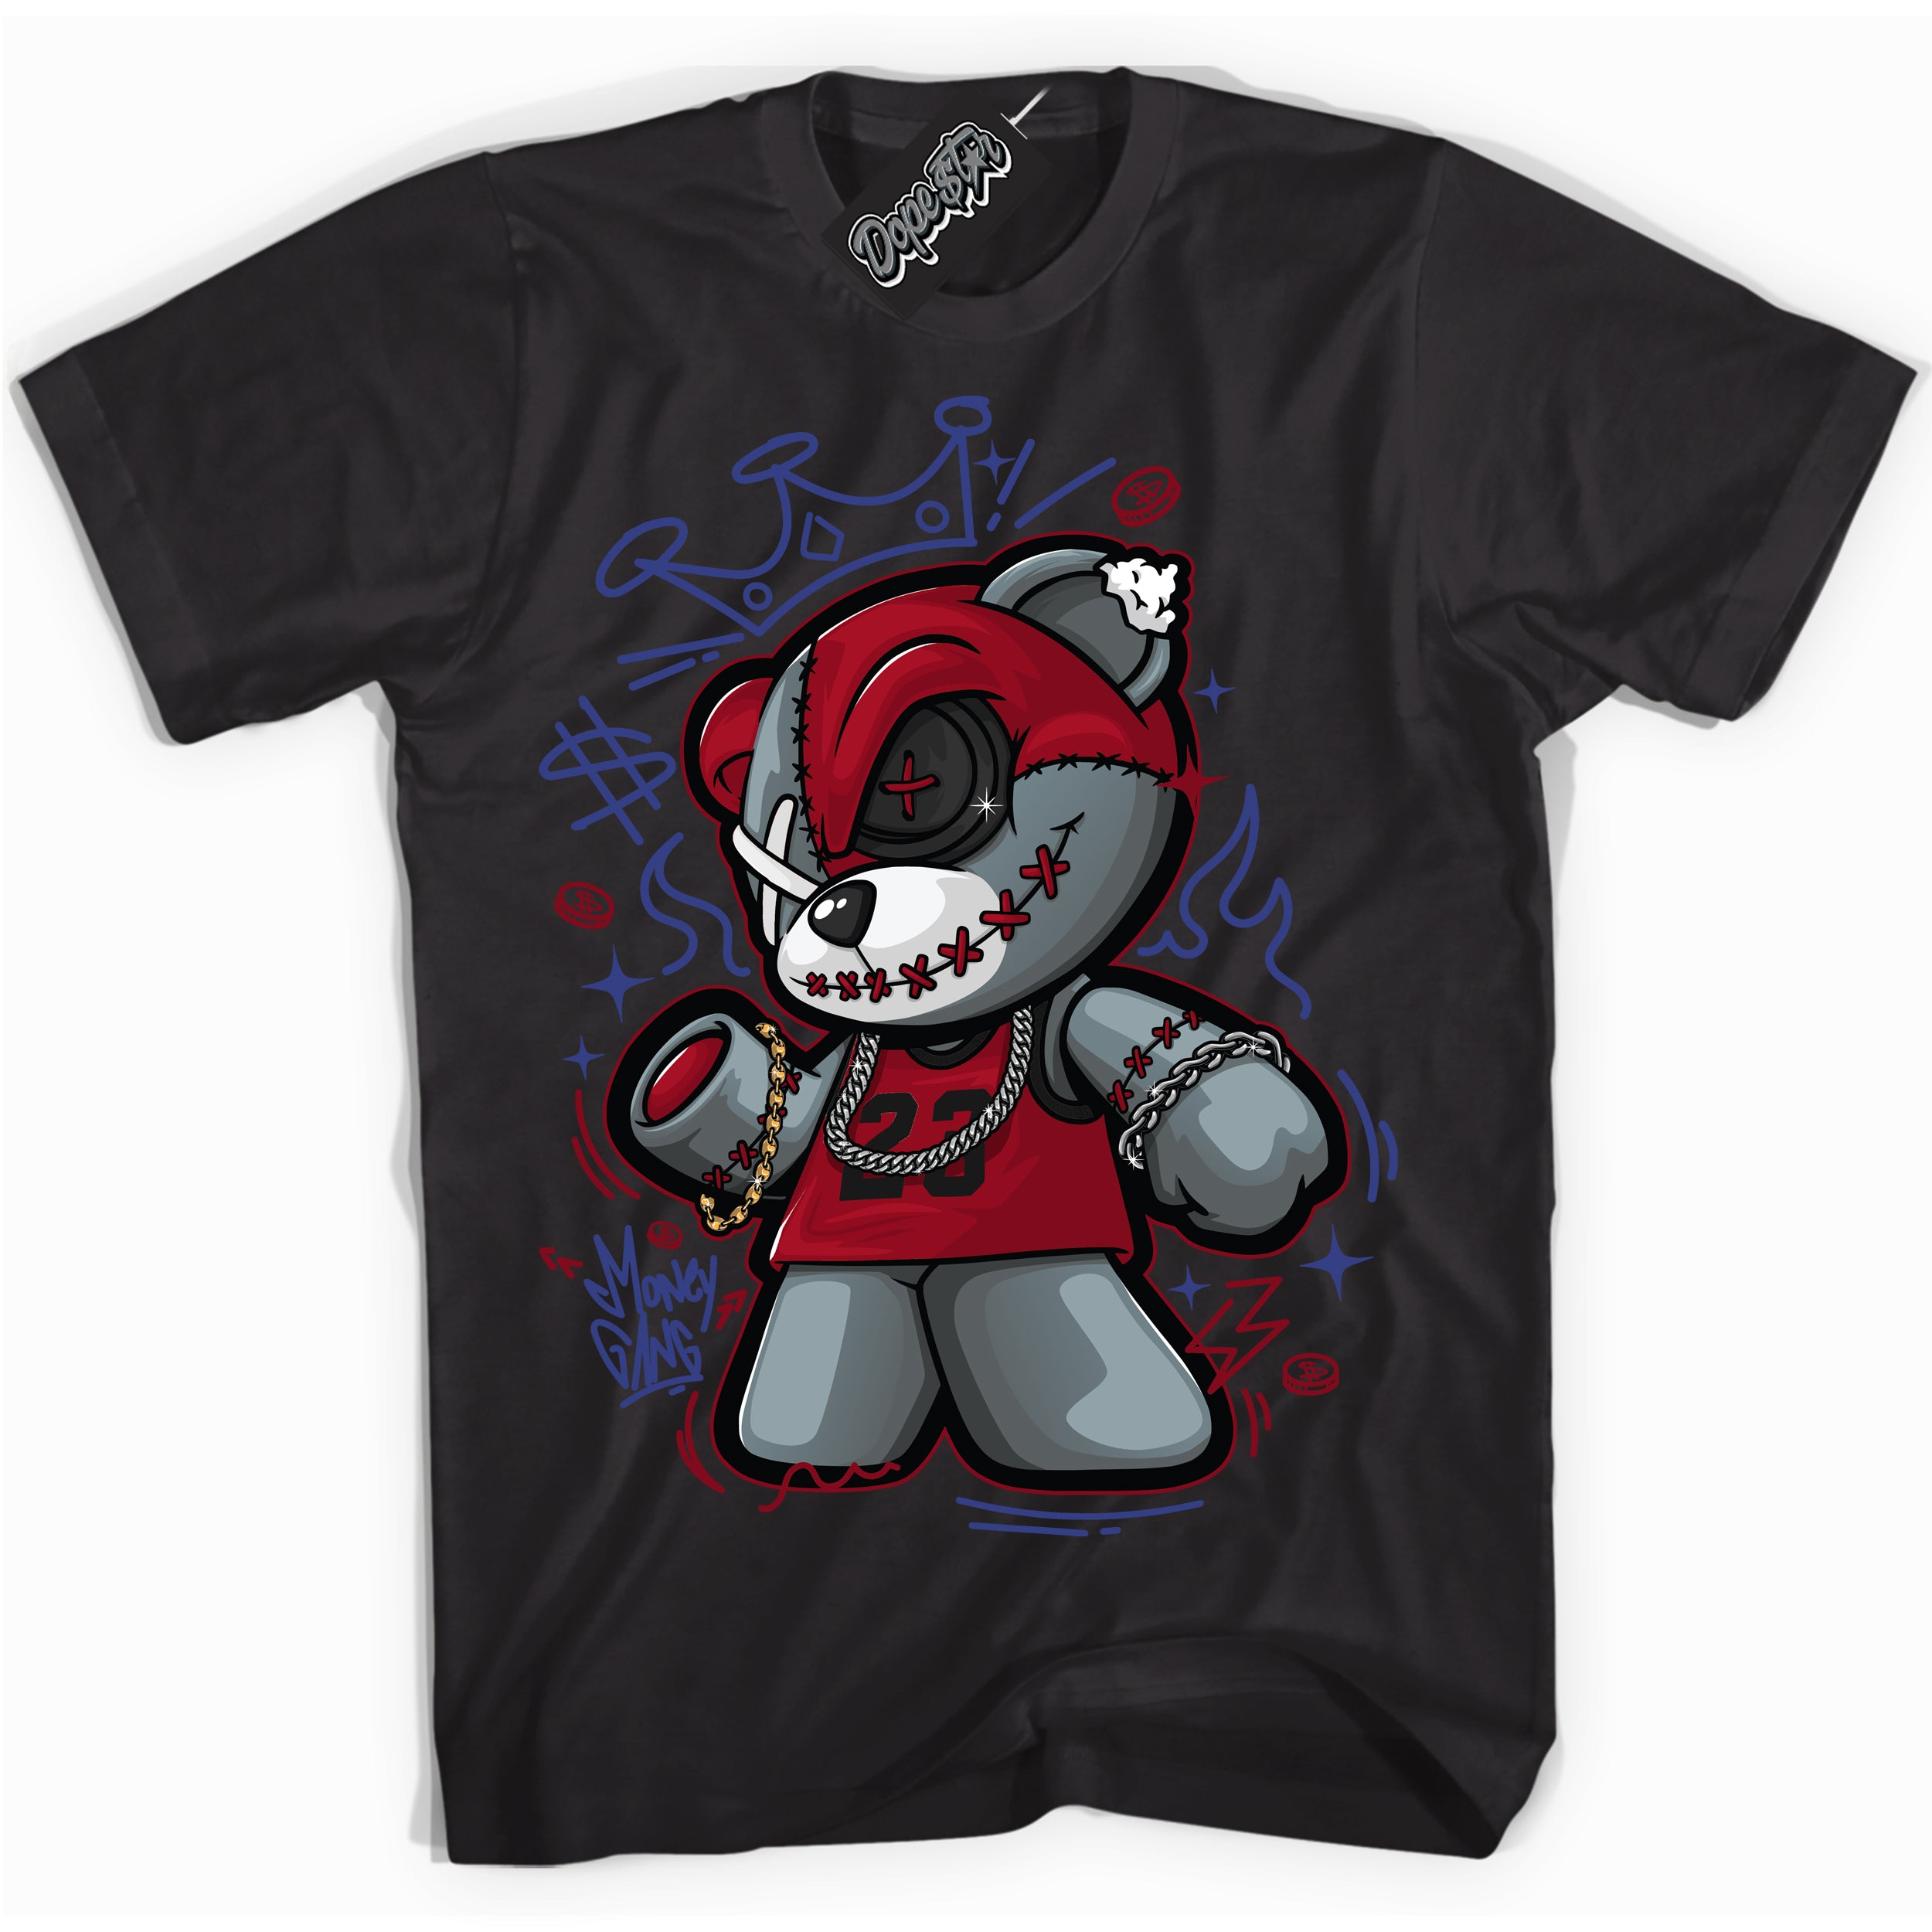 Cool Black Shirt with “ Money Gang Bear ” design that perfectly matches Playoffs 8s Sneakers.